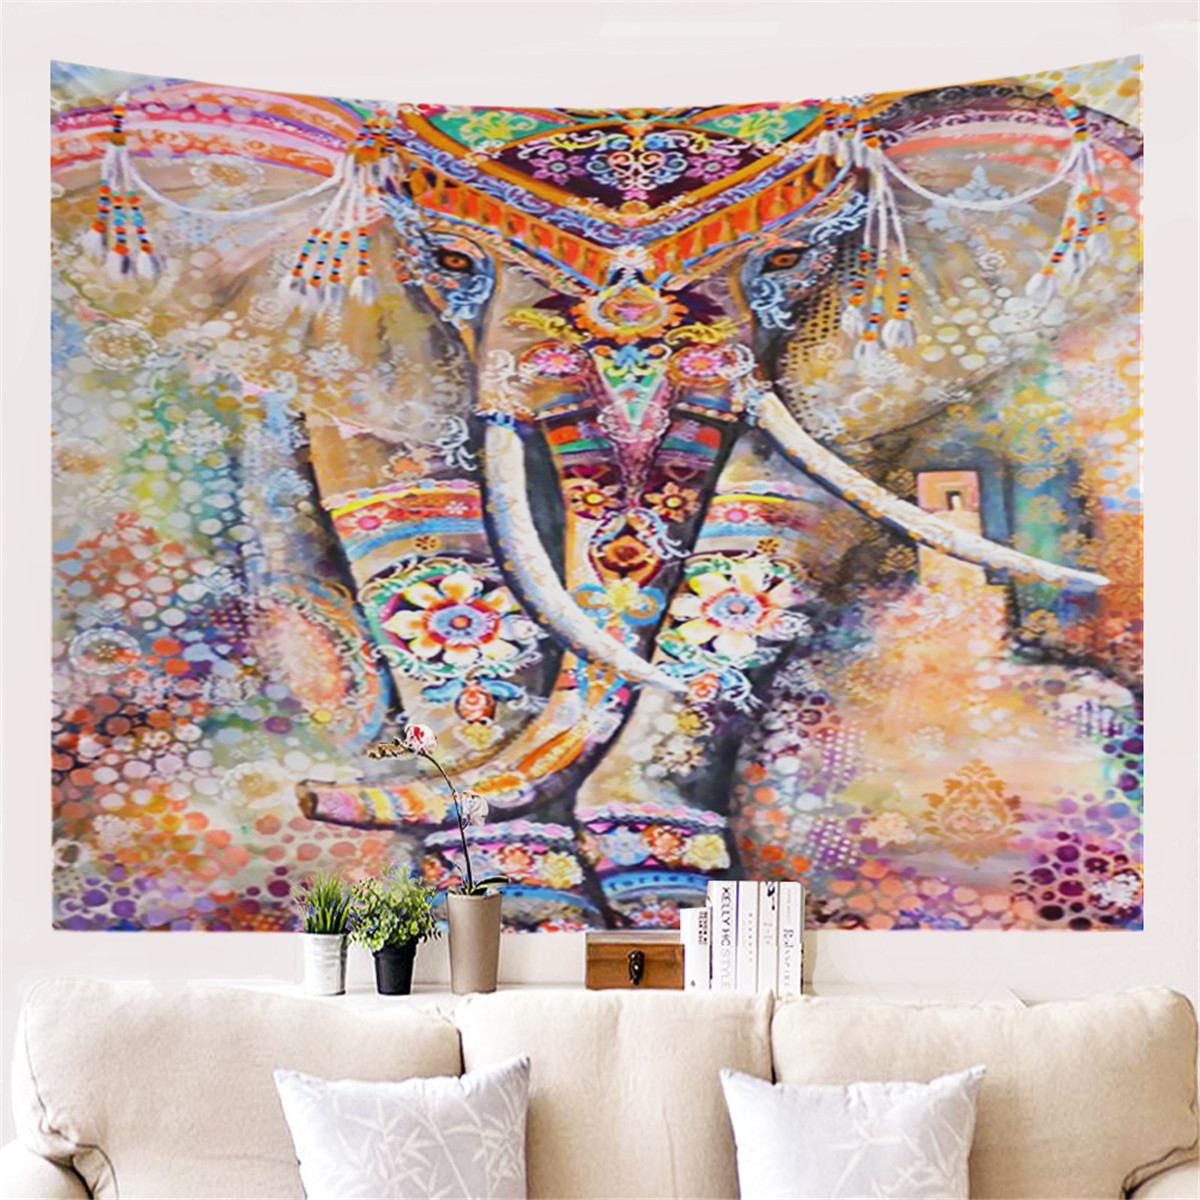 Colorful-Dye-Elephant-Tapestry-Wall-Hanging-Hippie-Tapestry-Colored-Printed-Decorative-Indian-Tapest-1751738-13